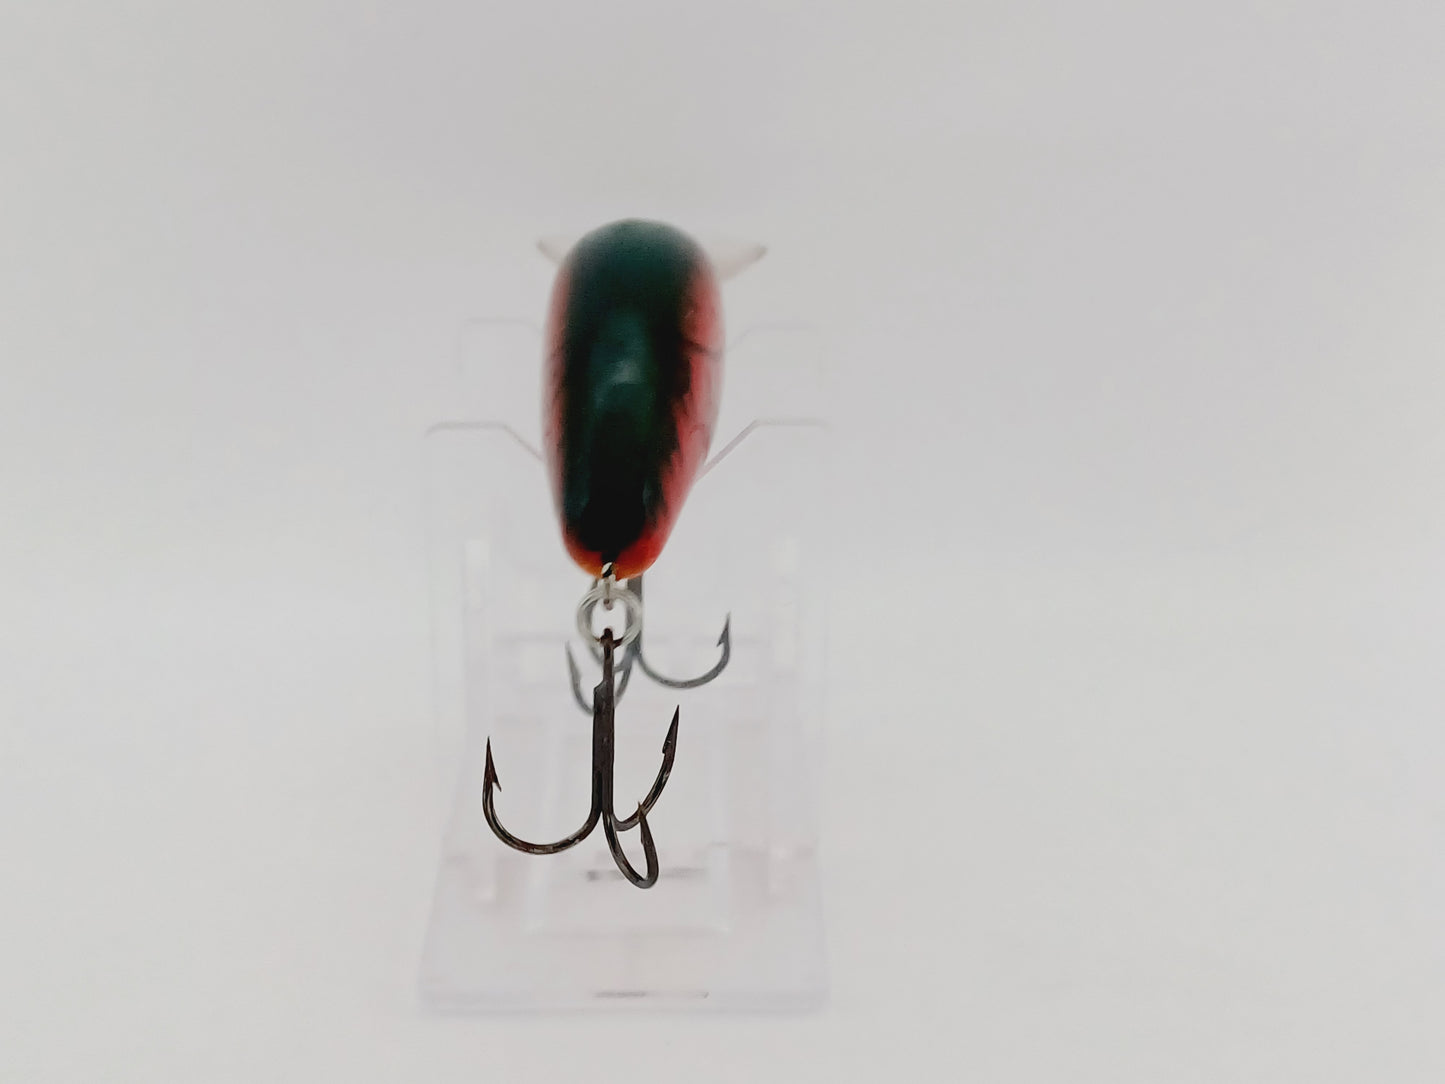 Classic Bill Dance Suspending Fat Free Shad (Holographic Red Craw) Rattling crankbait diving lure